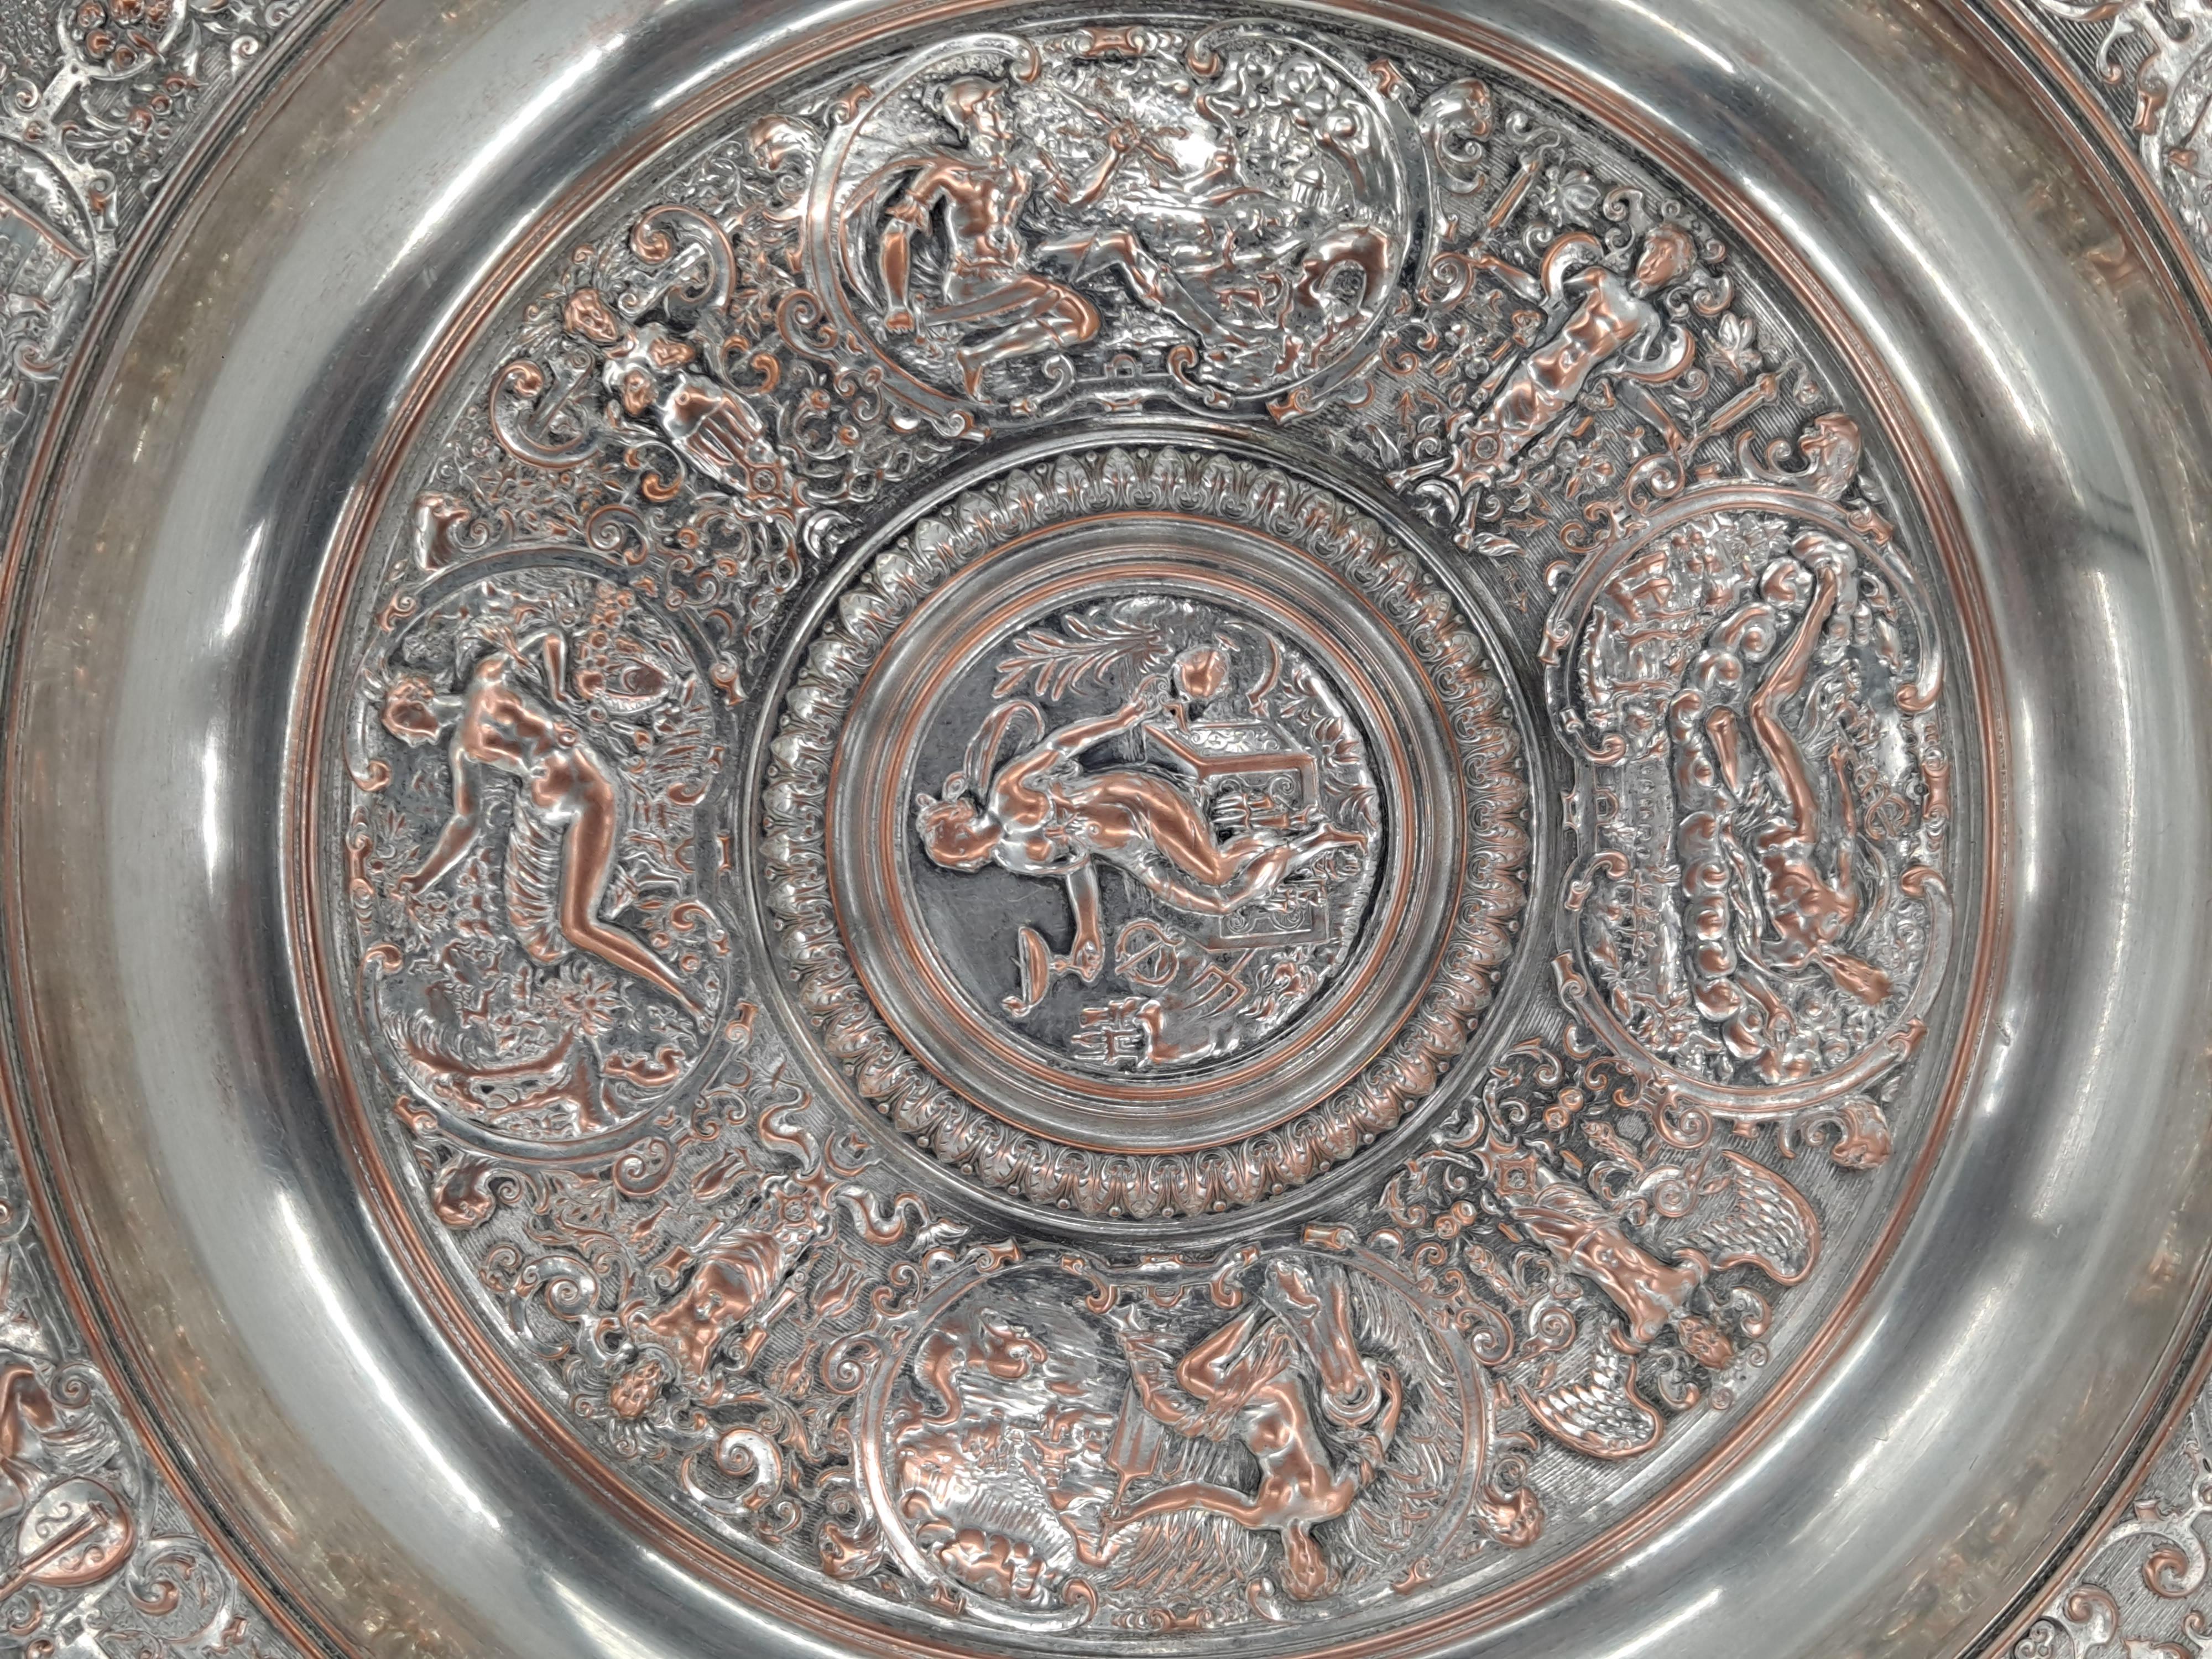 Victorian Elkington Electrotype Charger Plate

